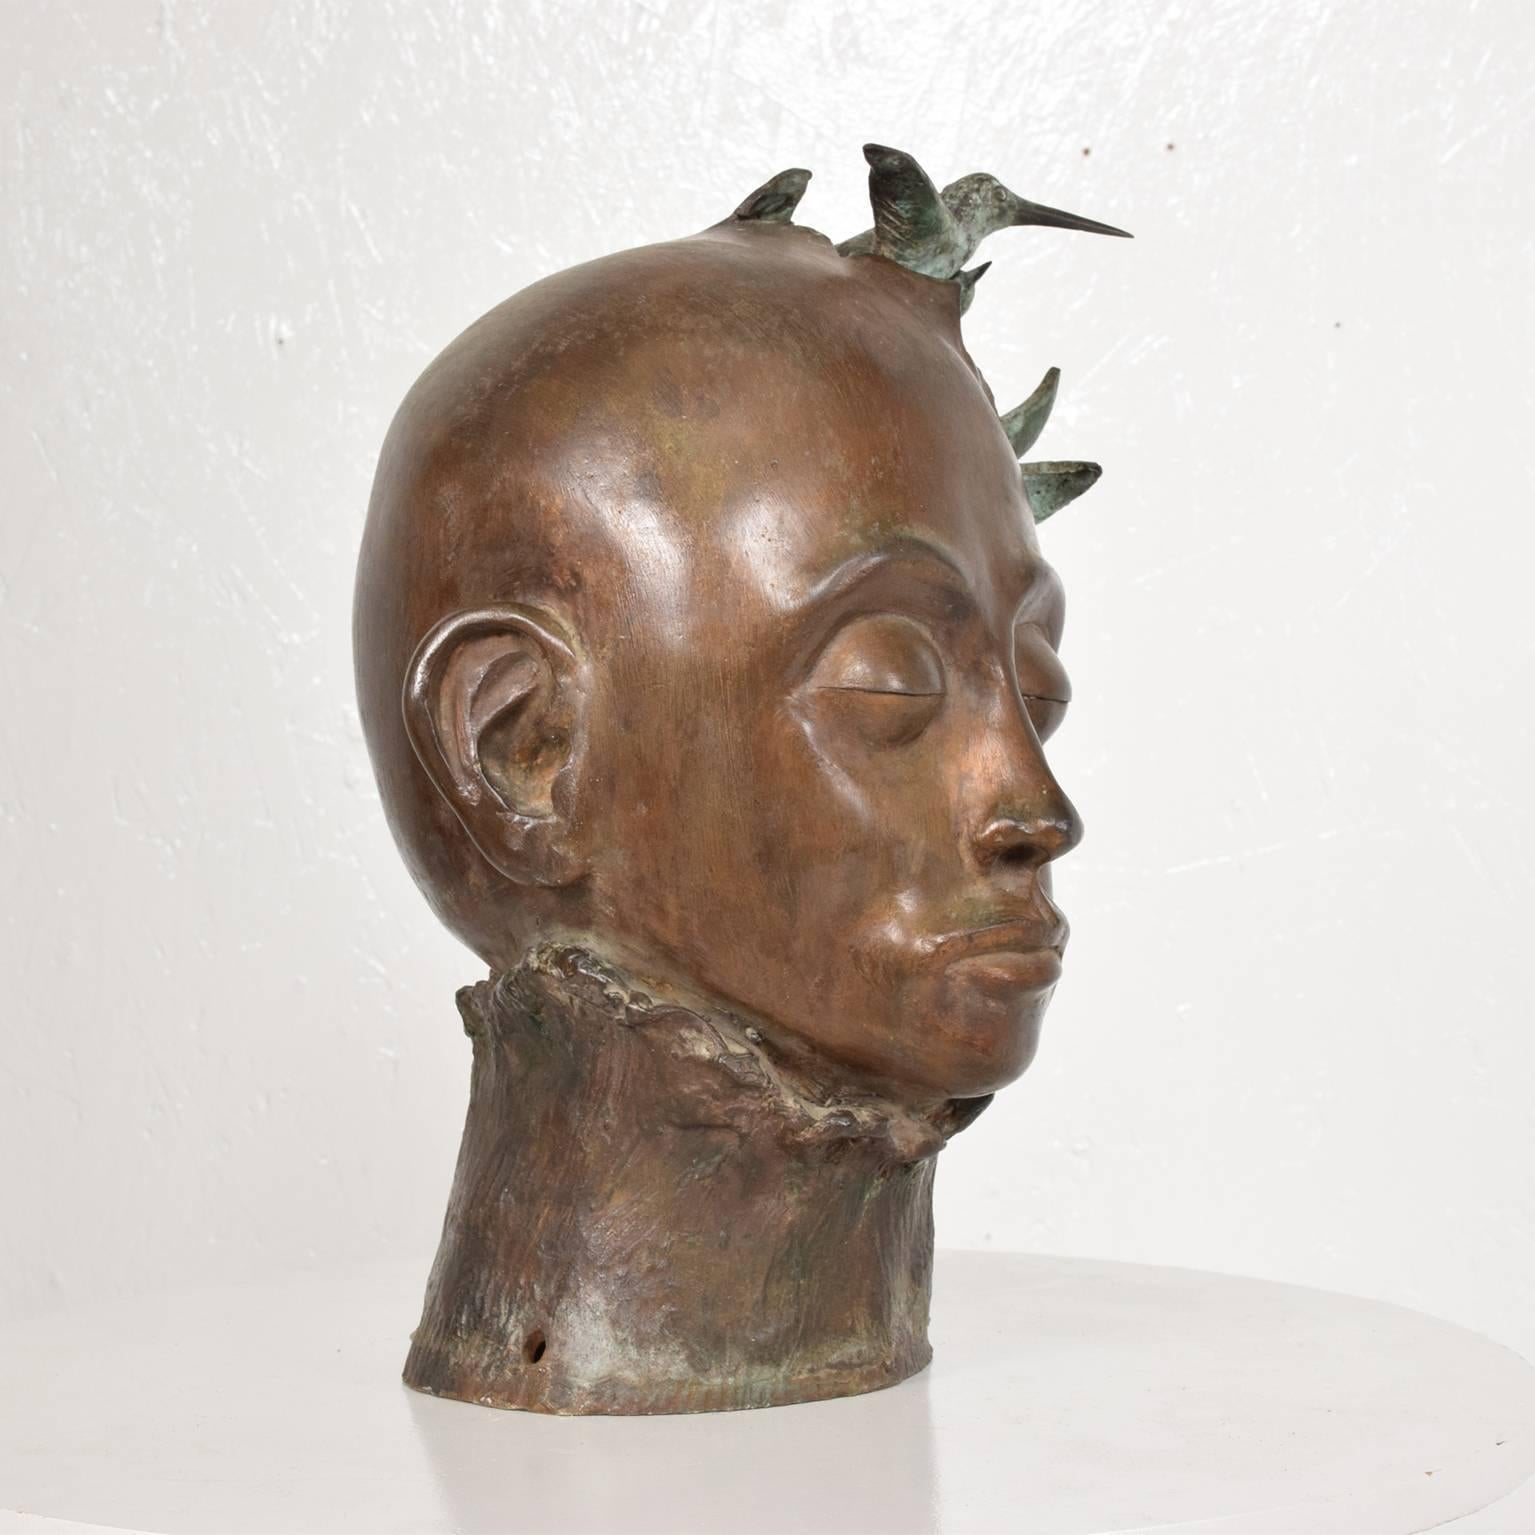 For your consideration a beautiful surrealist bronze head sculpture with birds.
Mexico, 1960s.
Unknown artist.
Measures: 11